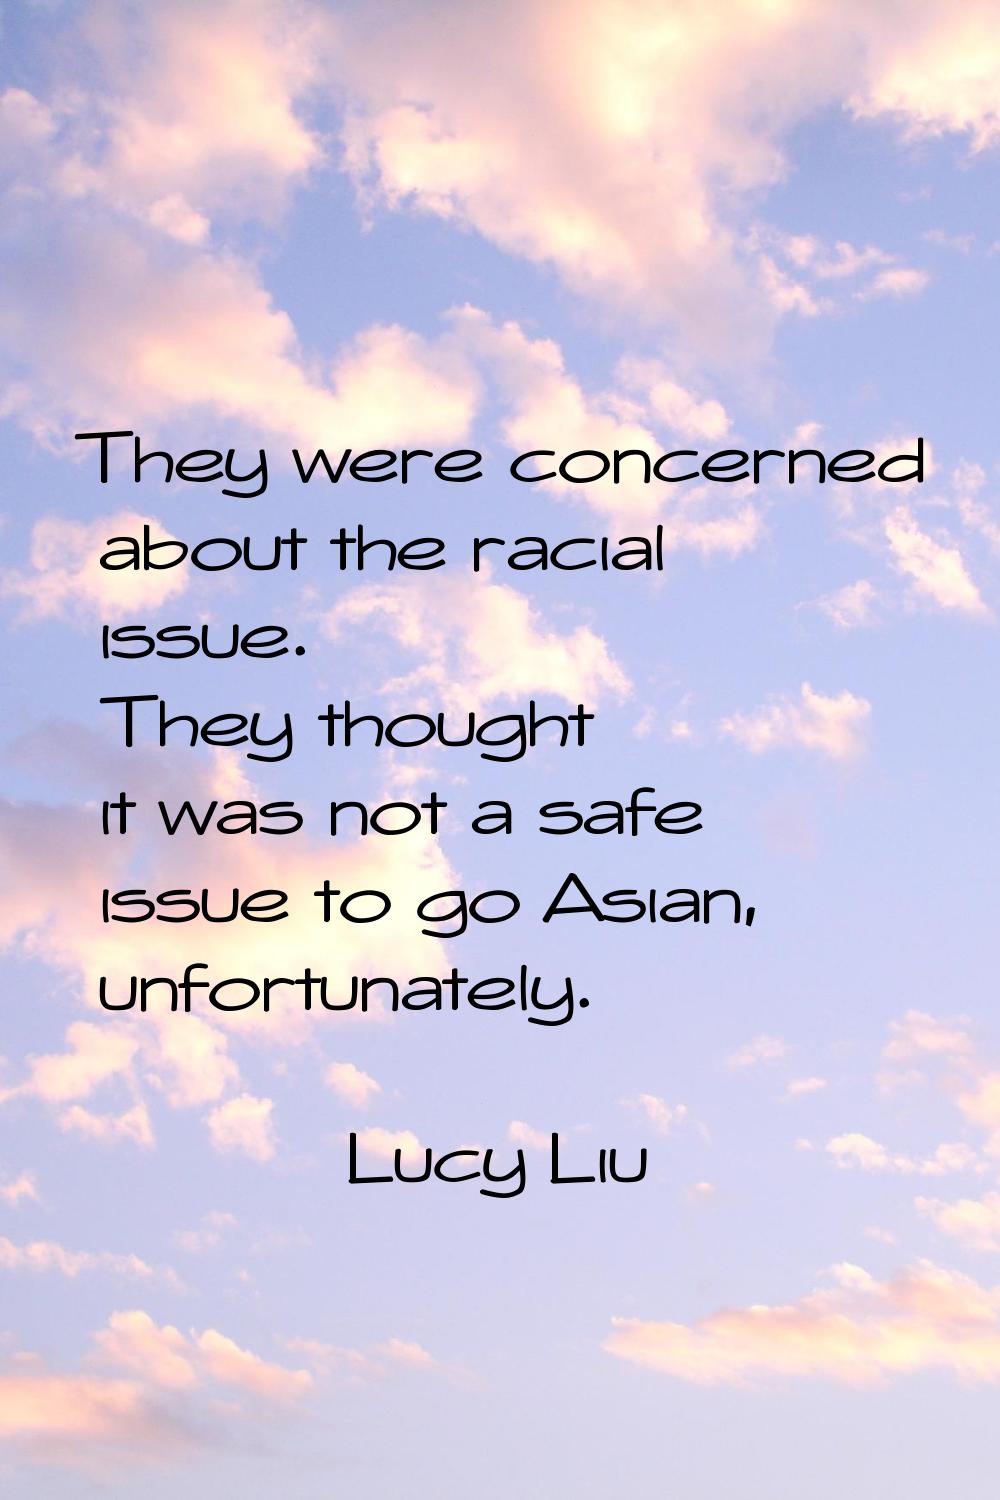 They were concerned about the racial issue. They thought it was not a safe issue to go Asian, unfor